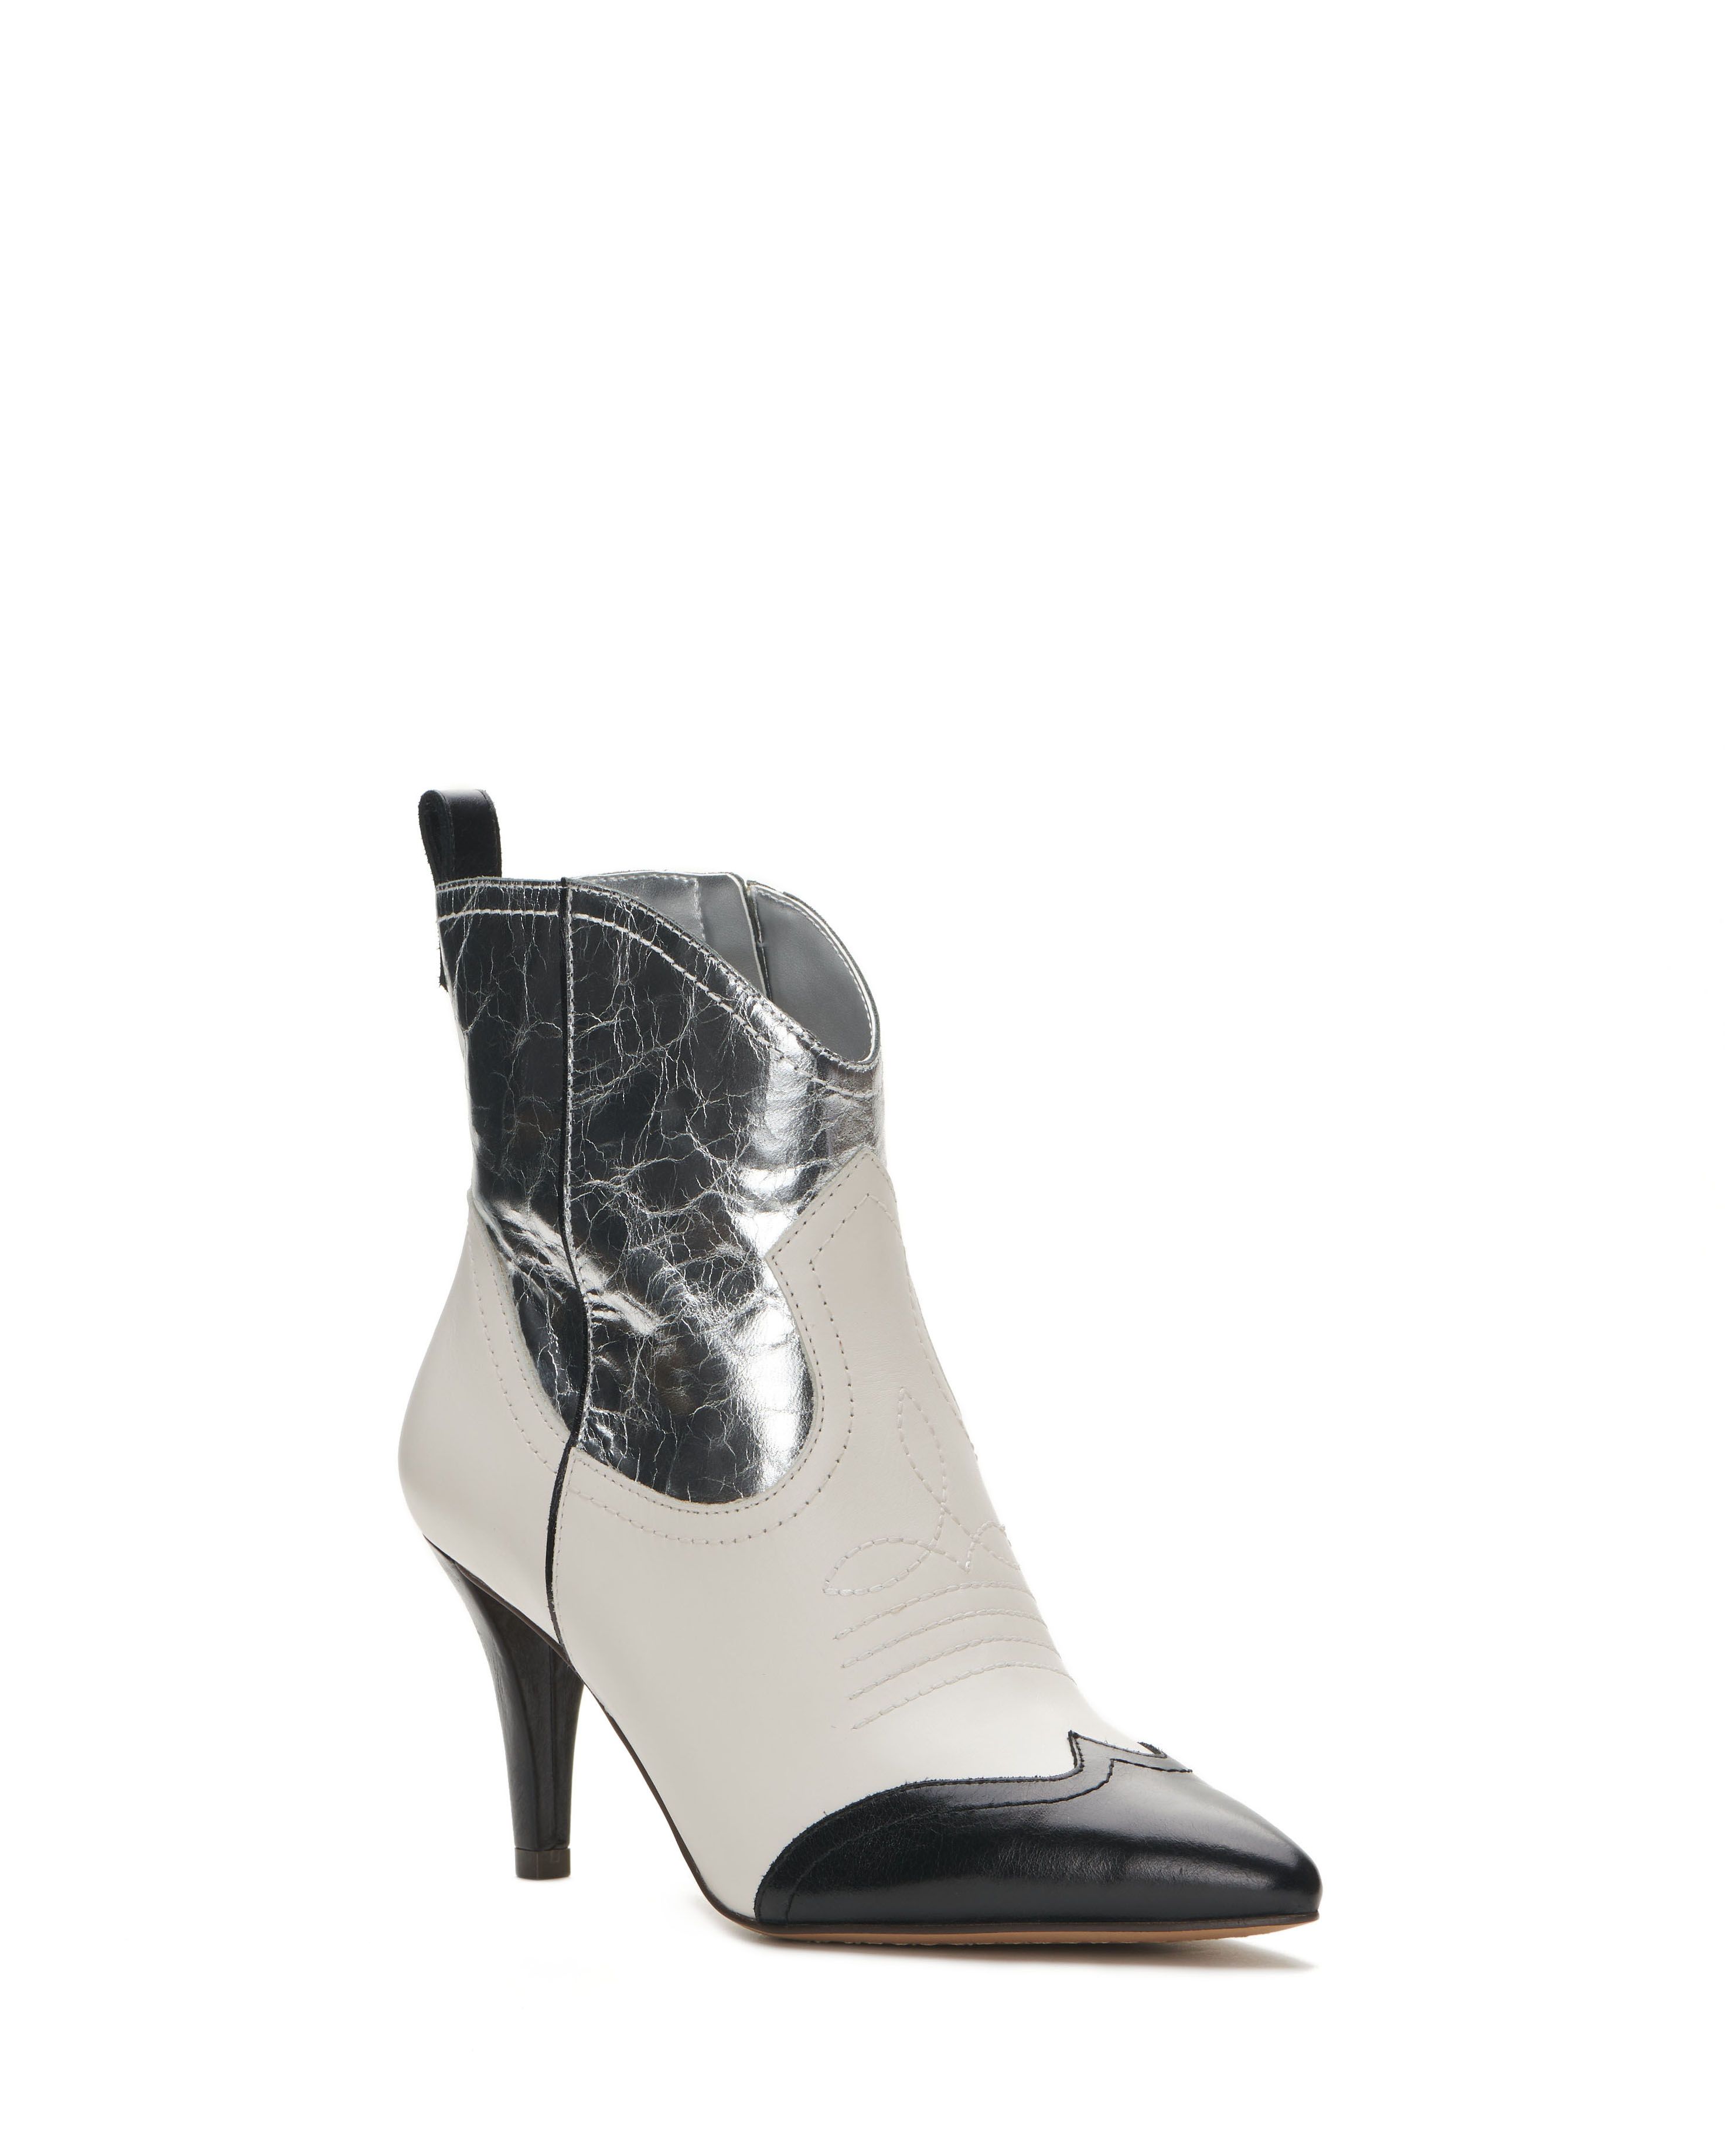 Vince Camuto Saiovell Bootie | Vince Camuto